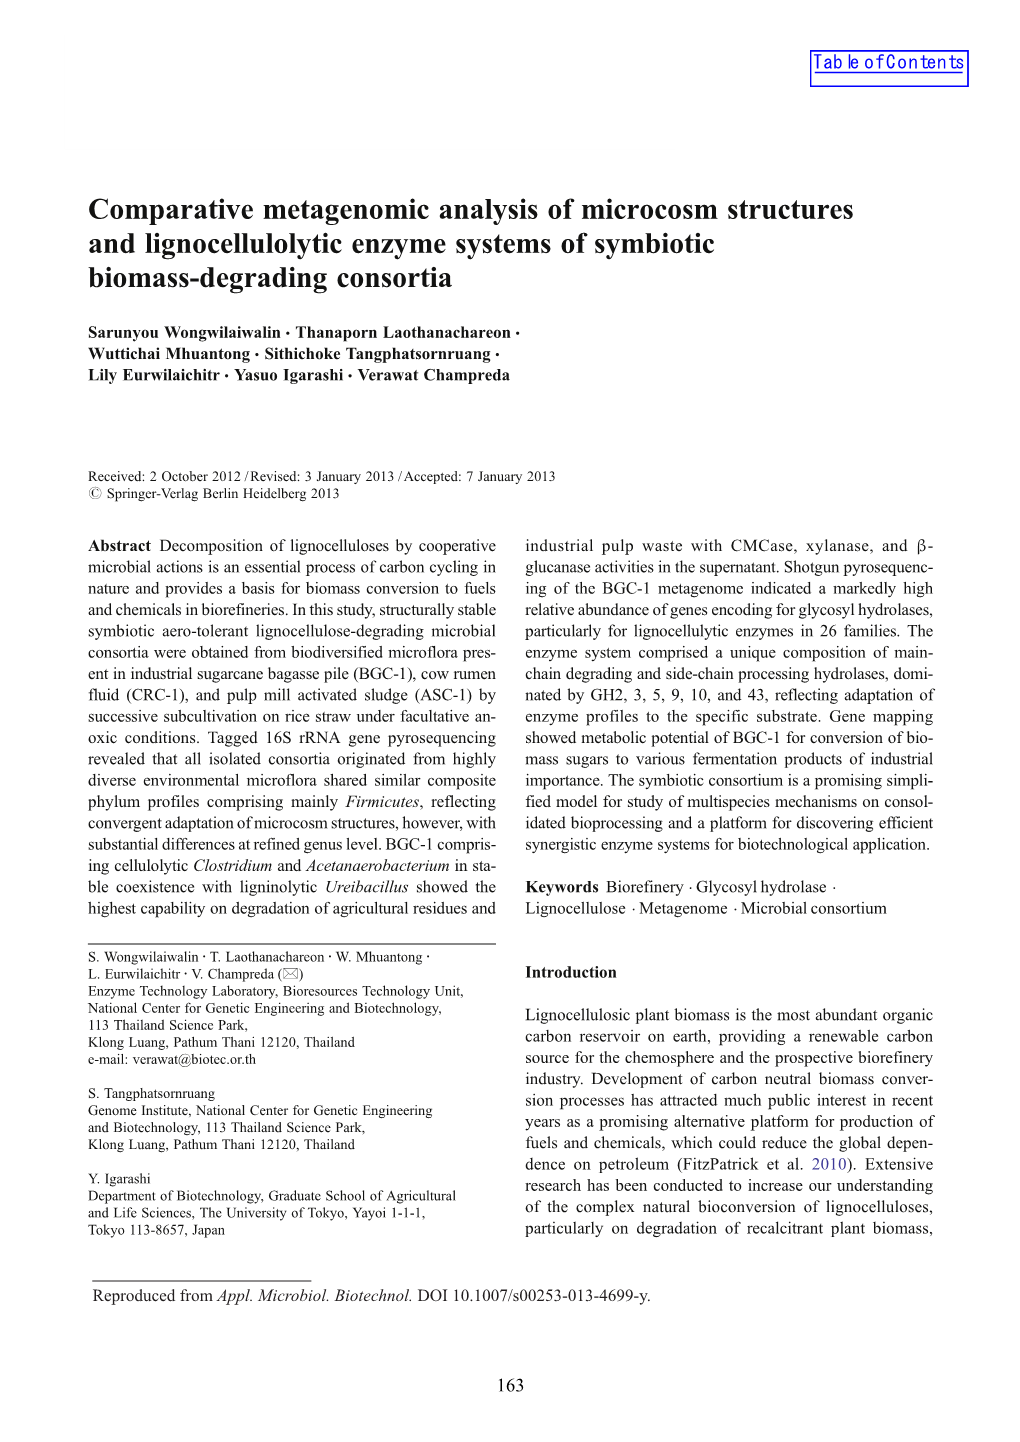 Comparative Metagenomic Analysis of Microcosm Structures and Lignocellulolytic Enzyme Systems of Symbiotic Biomass-Degrading Consortia